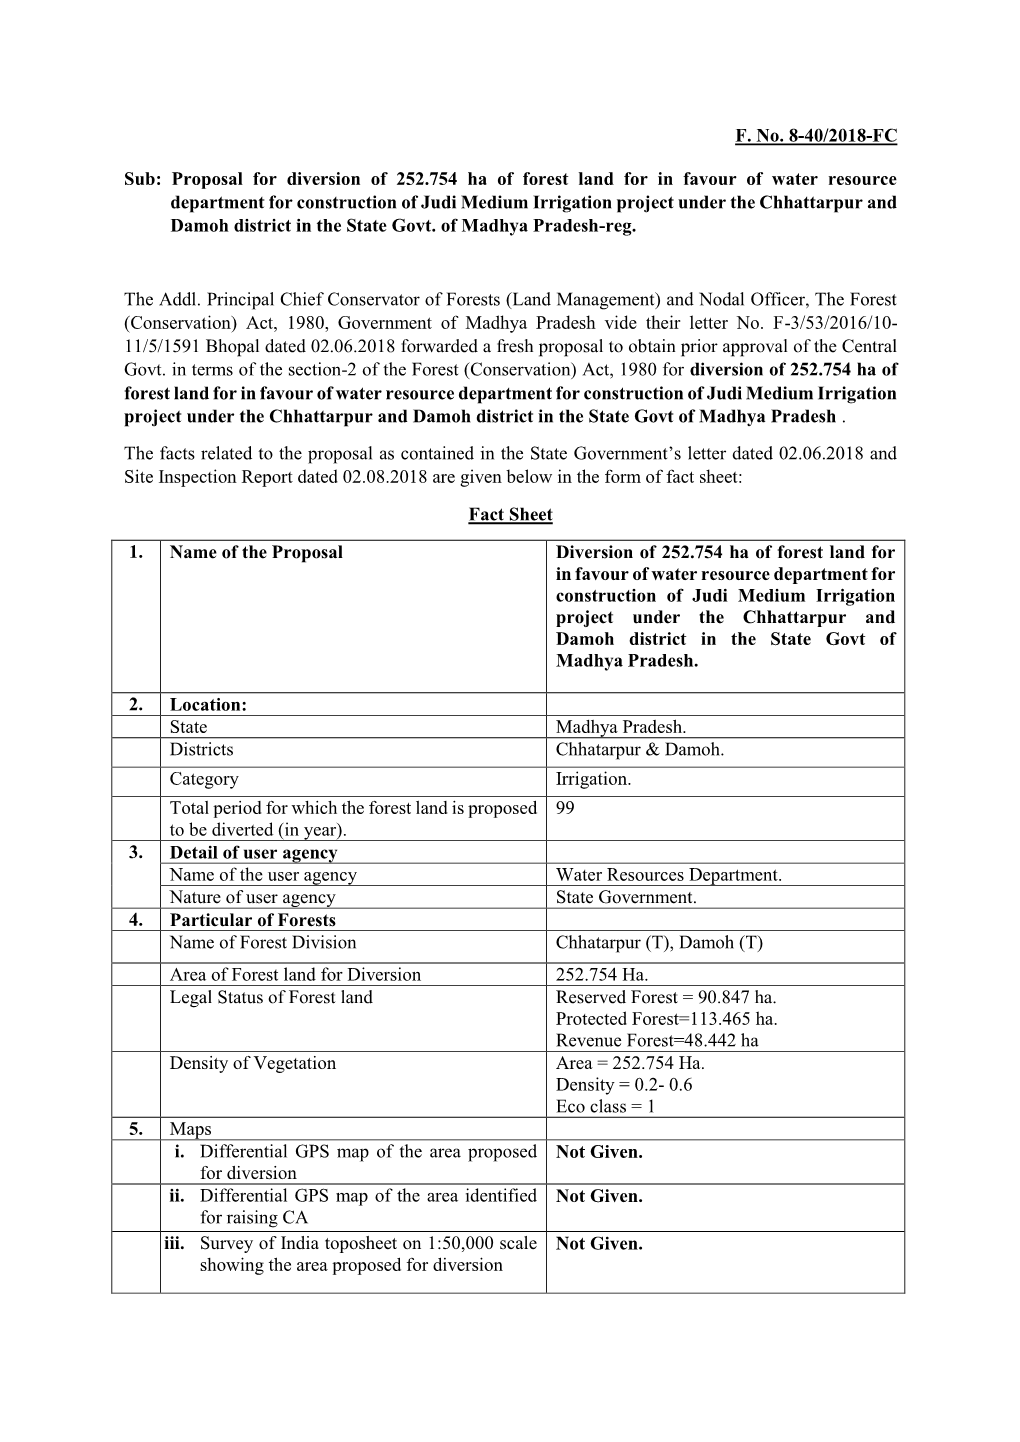 F. No. 8-40/2018-FC Sub: Proposal for Diversion of 252.754 Ha of Forest